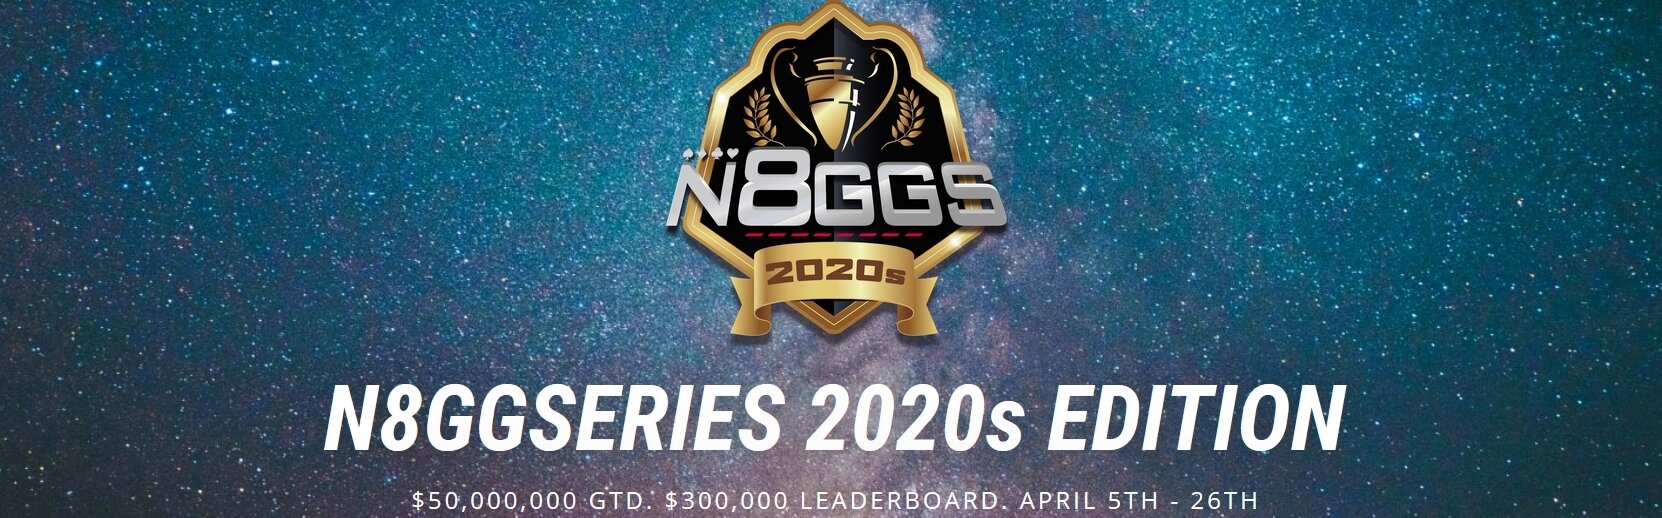 $ 50M Guarantee for the Good Game Series 2020s - starting this week.